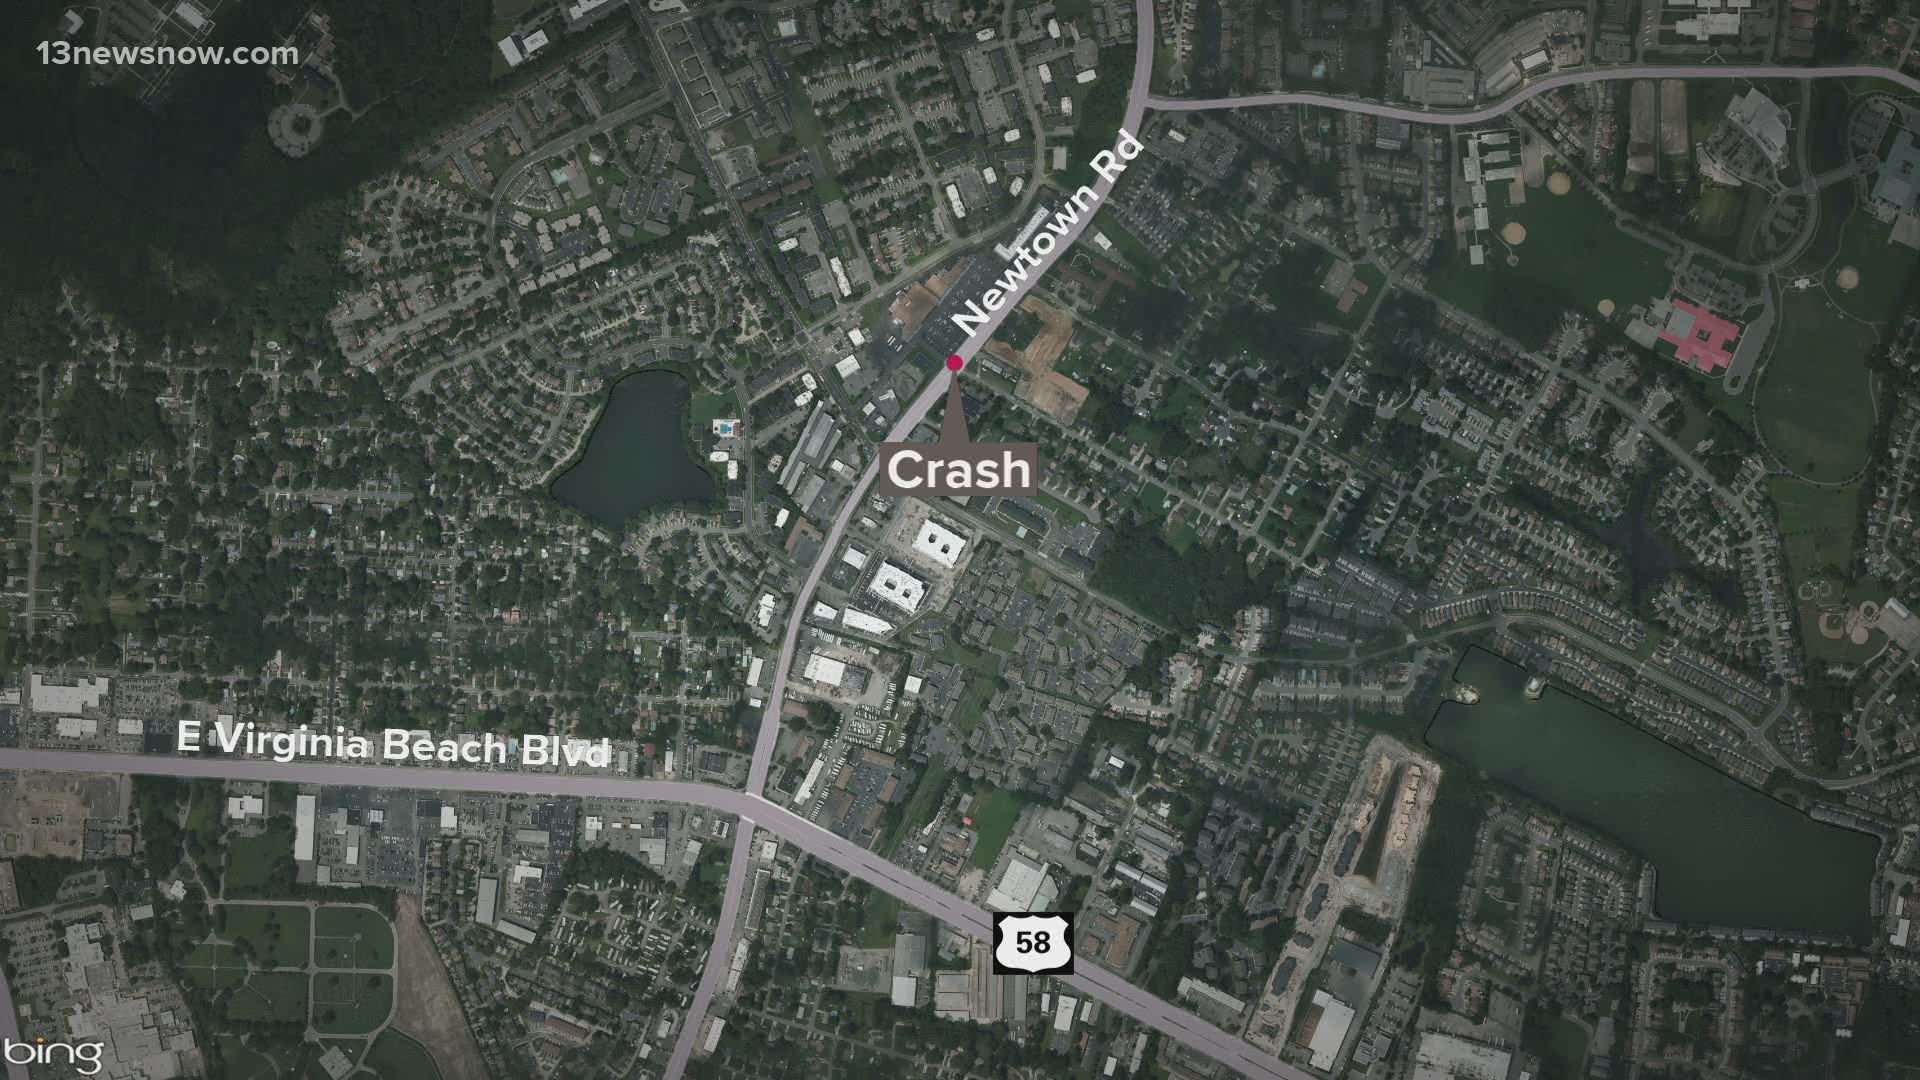 Virginia Beach Police say the accident happened in the 600 block of Newtown Road at the intersection with Connie Lane shortly after 6:30 p.m.